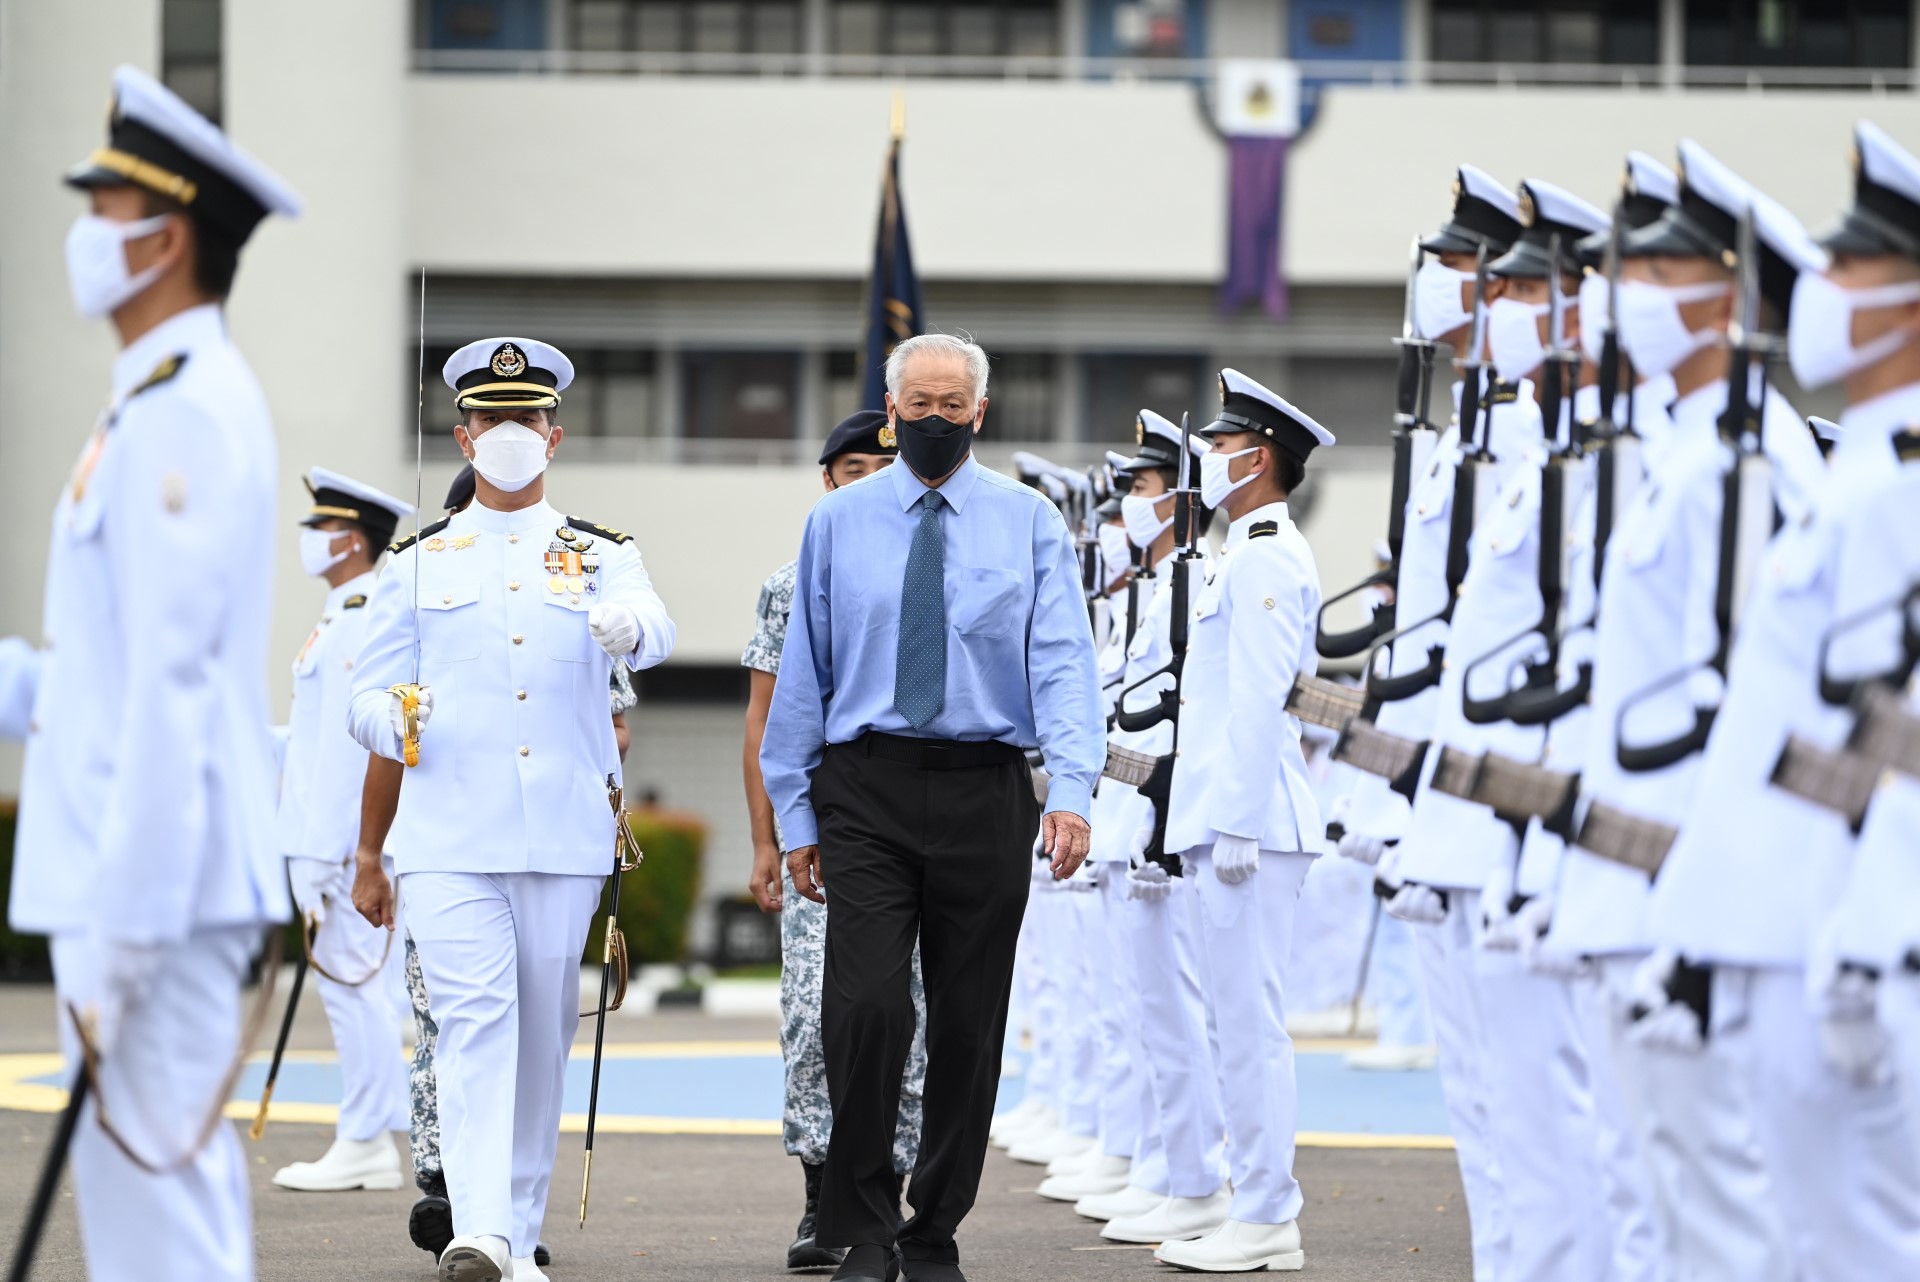 Minister for Defence Dr Ng Eng Hen inspecting the contingents on parade at the Naval Diving Unit 50th Anniversary parade at Sembawang Camp this evening.